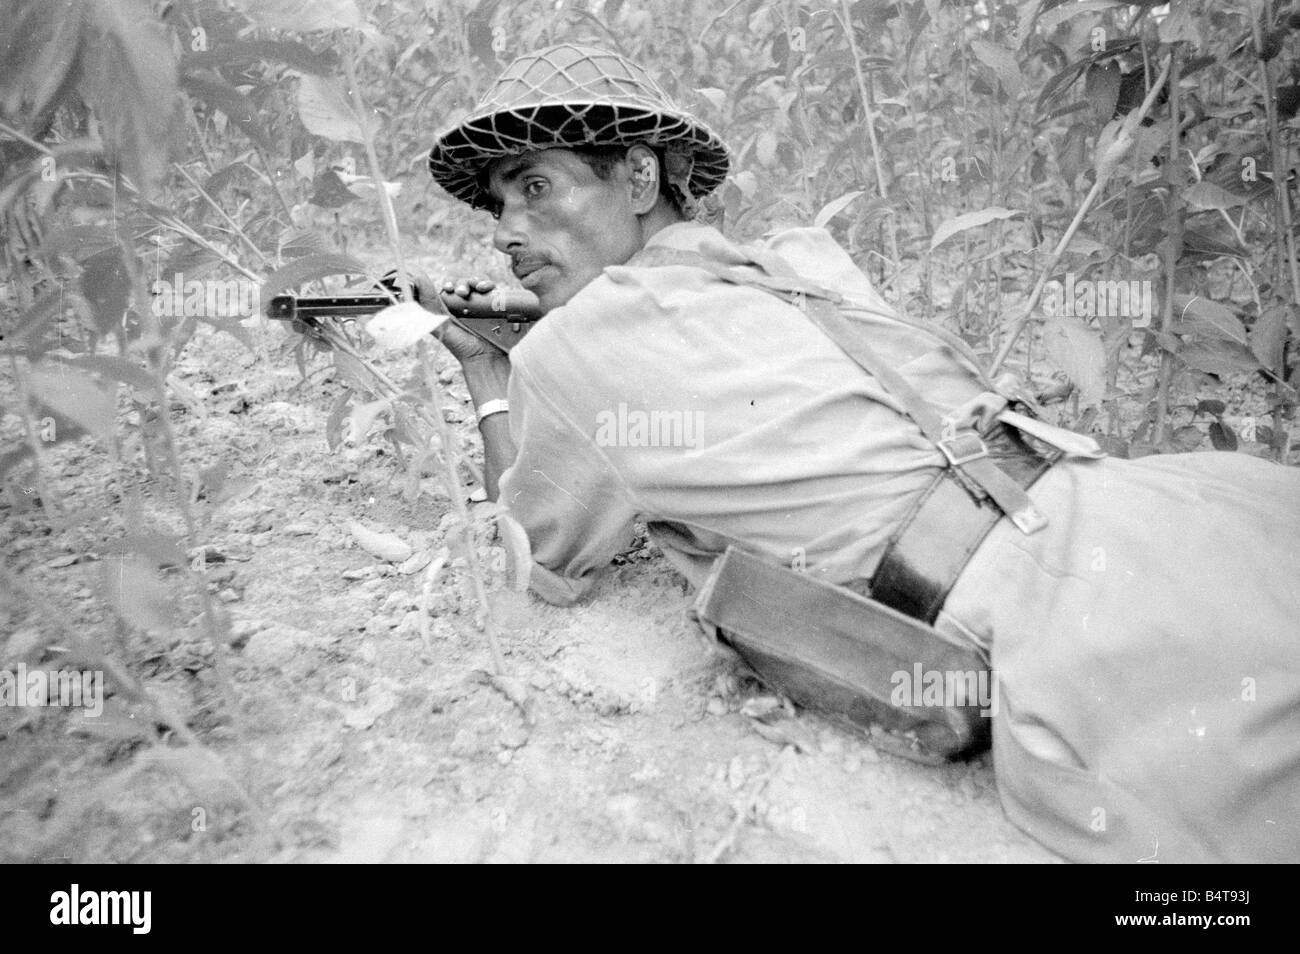 Pakistan - Bangladesh Civil War 15th June 1971;A large area of East Pakistan territory is under the control of the Bangladesh Freedom Fighters. These pictures were taken on patrol with an operational unit whose camp is in the Jungle just inside the Indian border.;Our Picture Shows: Troops on patrol in East Pakistan Stock Photo